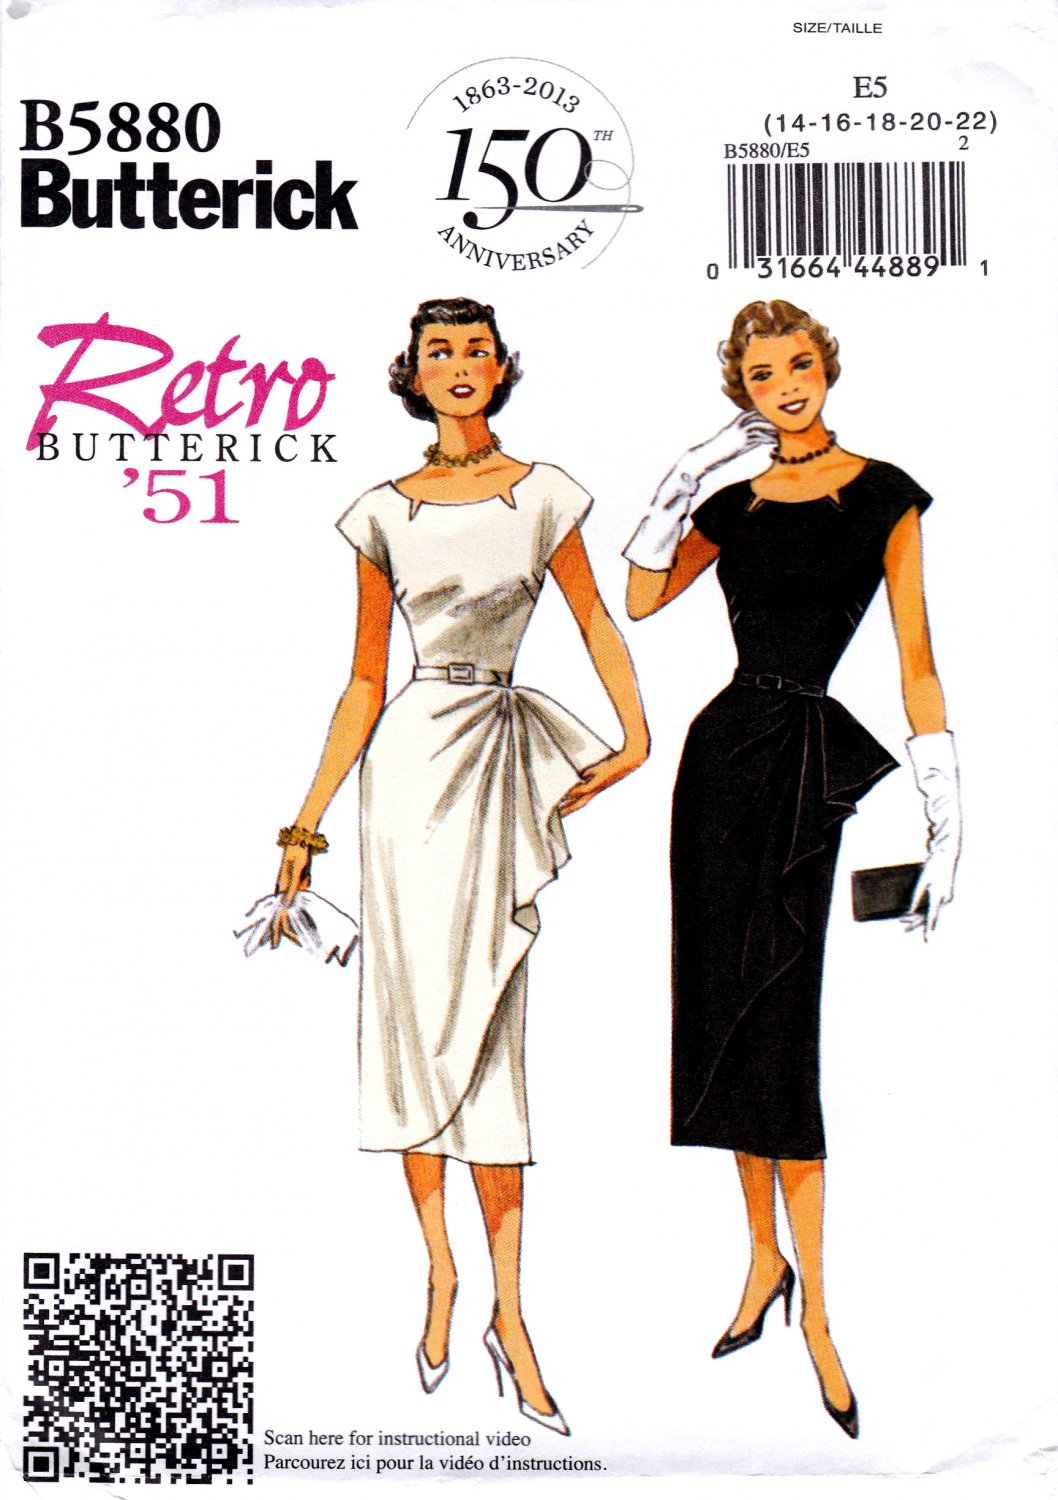 Butterick B5880 5880 Misses Petite Dress and Belt in a 1951 Design Sewing Pattern Sizes 6-8-10-12-14